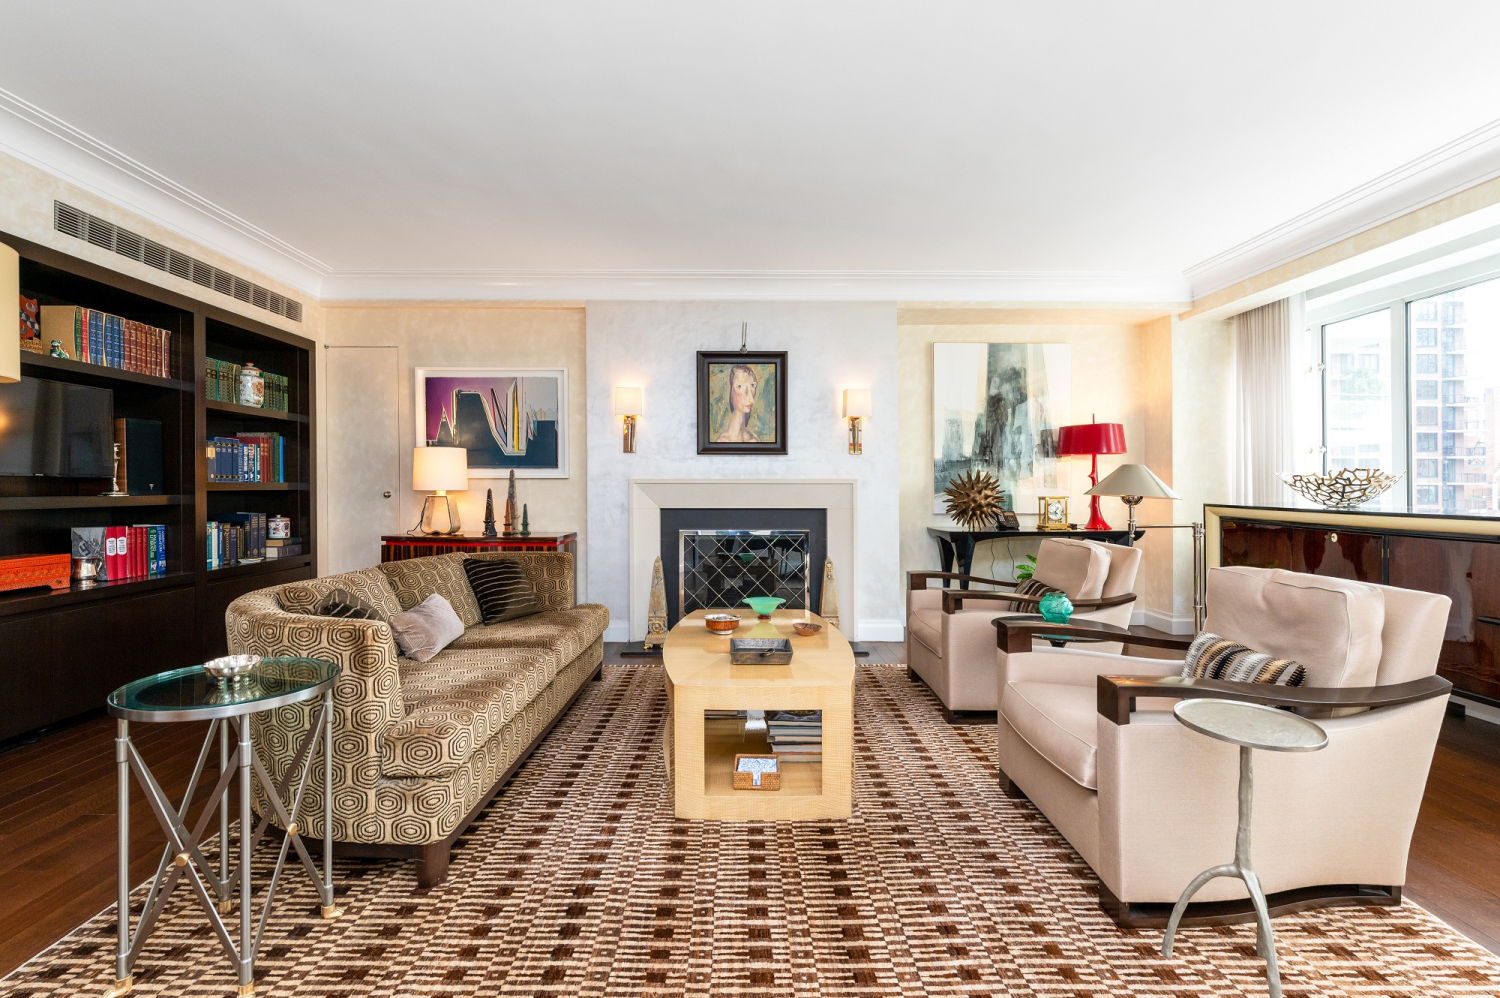 200 East 66th Street D1701, Lenox Hill, Upper East Side, NYC - 2 Bedrooms  
2 Bathrooms  
5 Rooms - 